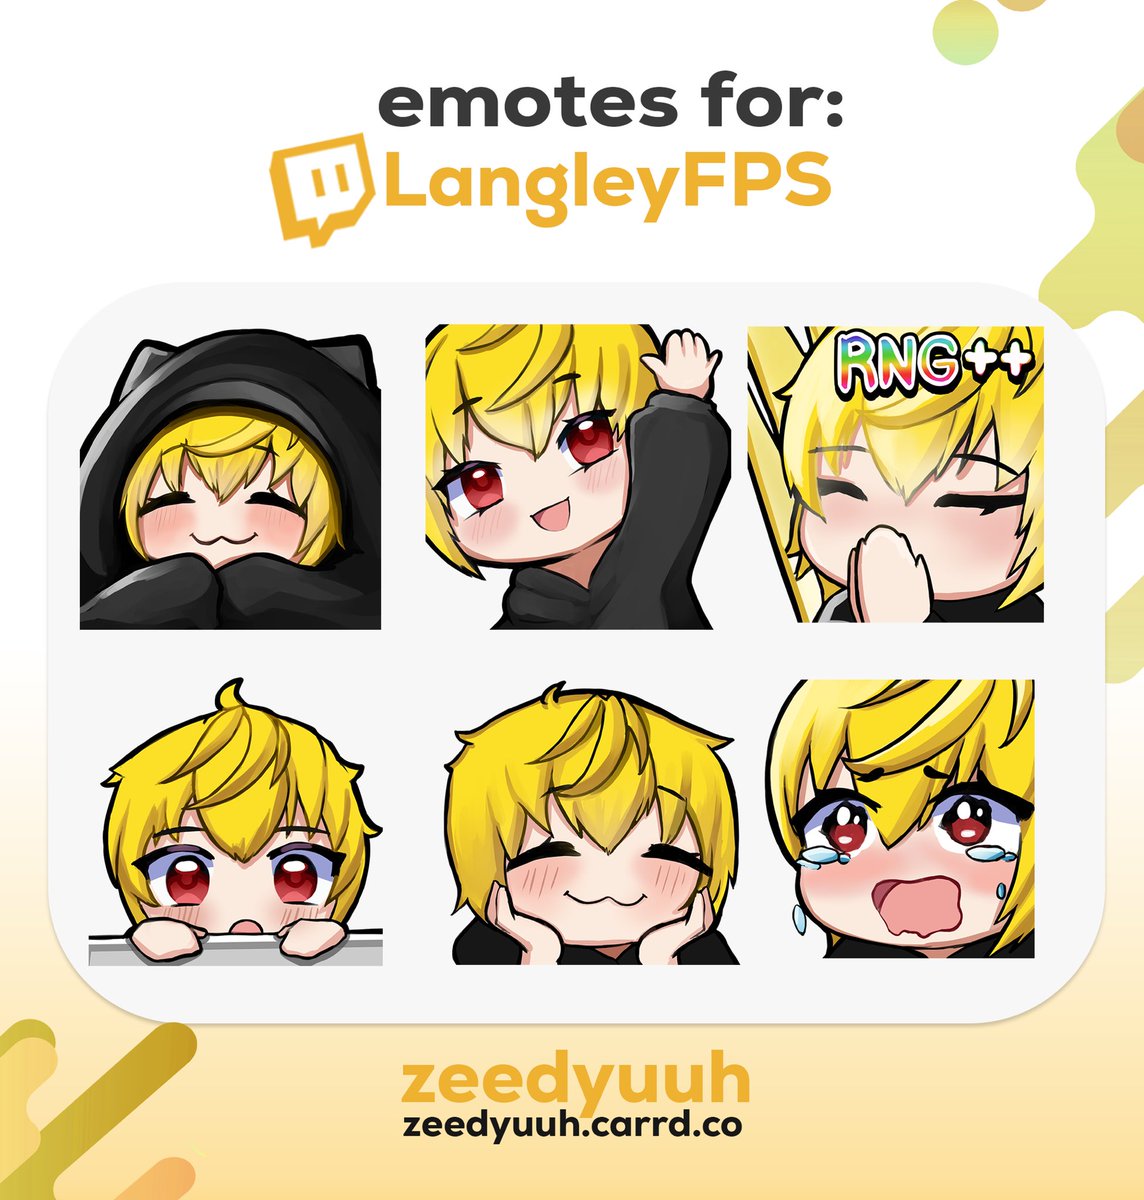 emotes for @/langleyFPS 💛
thank you for commissioning me!~ 

#emotes #twitchemotes #twitch